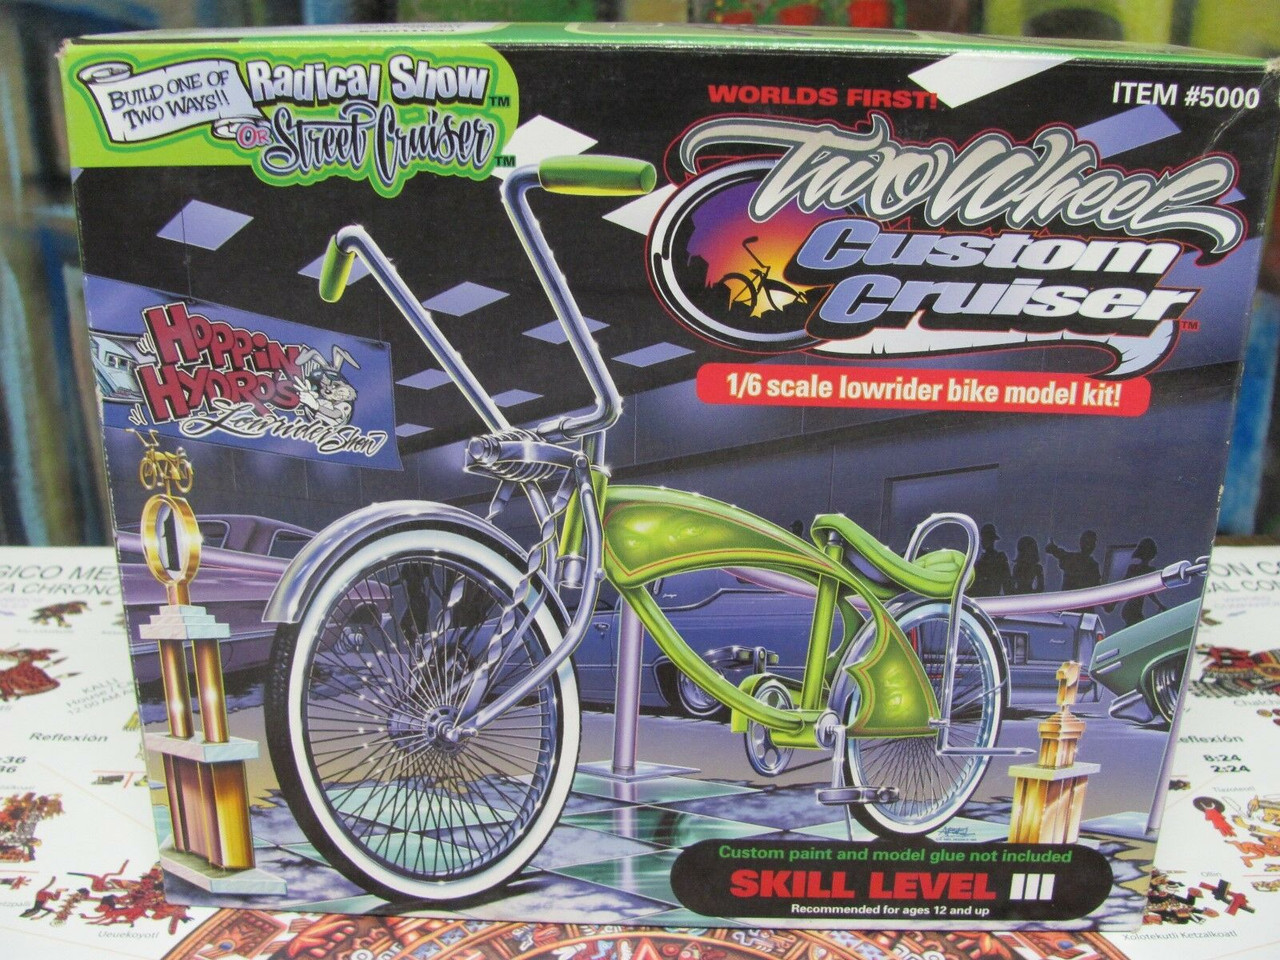 Lowrider bike scale model kit for diorama in 1:24 scale